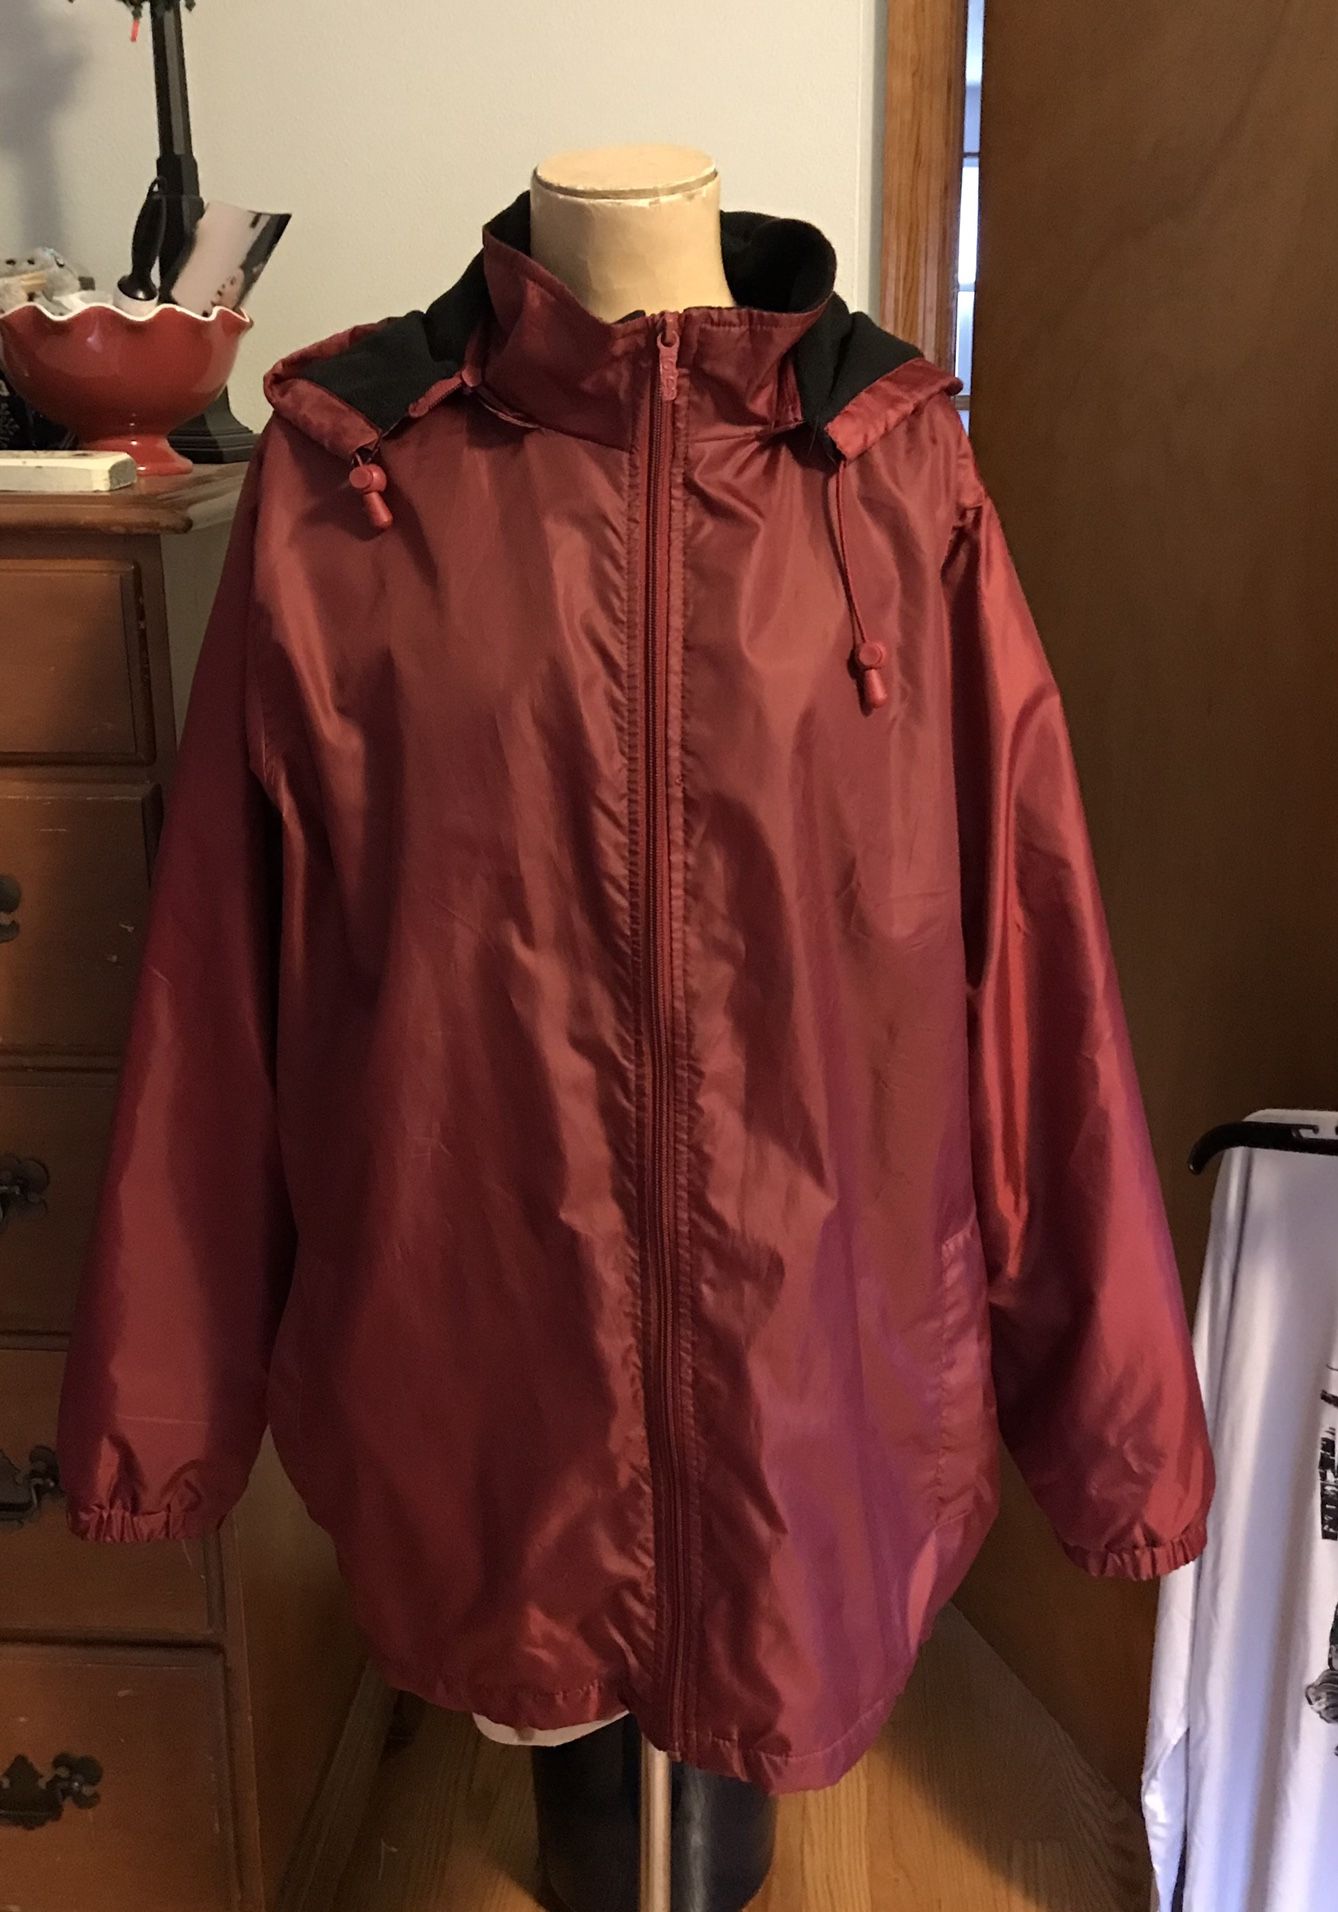 Totes Water-Resistant Fleece-Lined Jacket in Burgundy. Size XLG